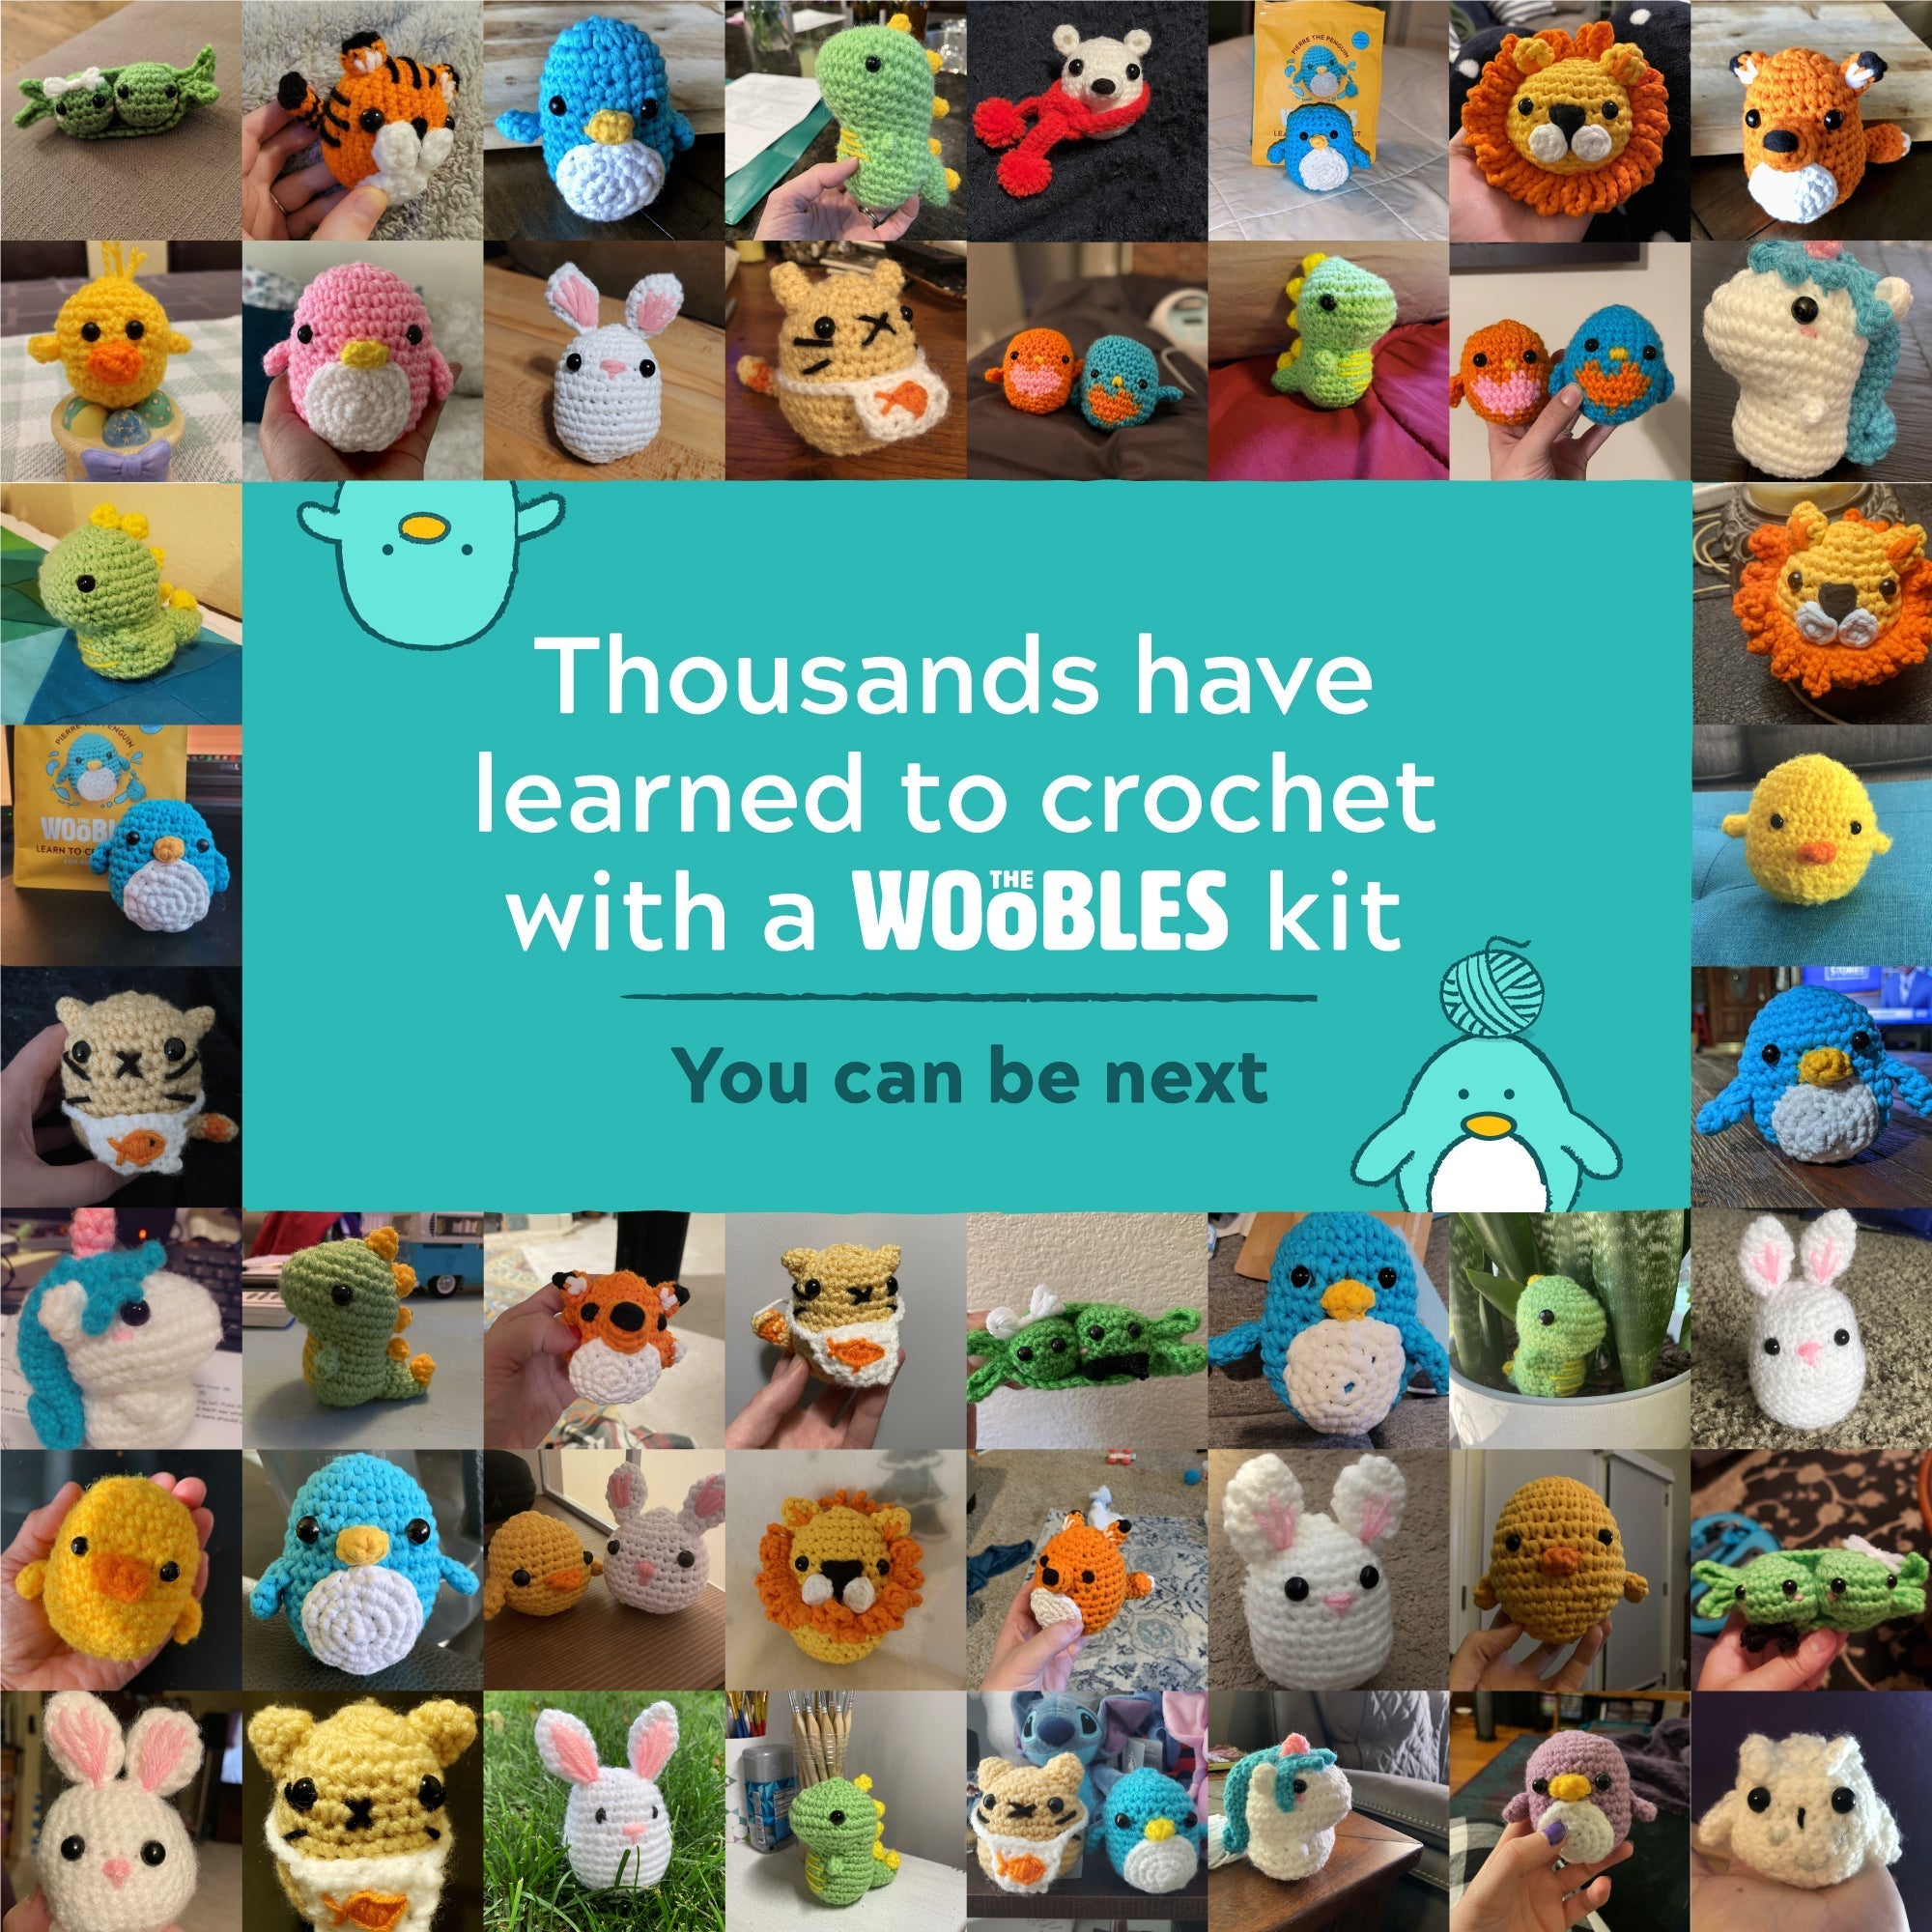 The Woobles: We saw you were eyeing this